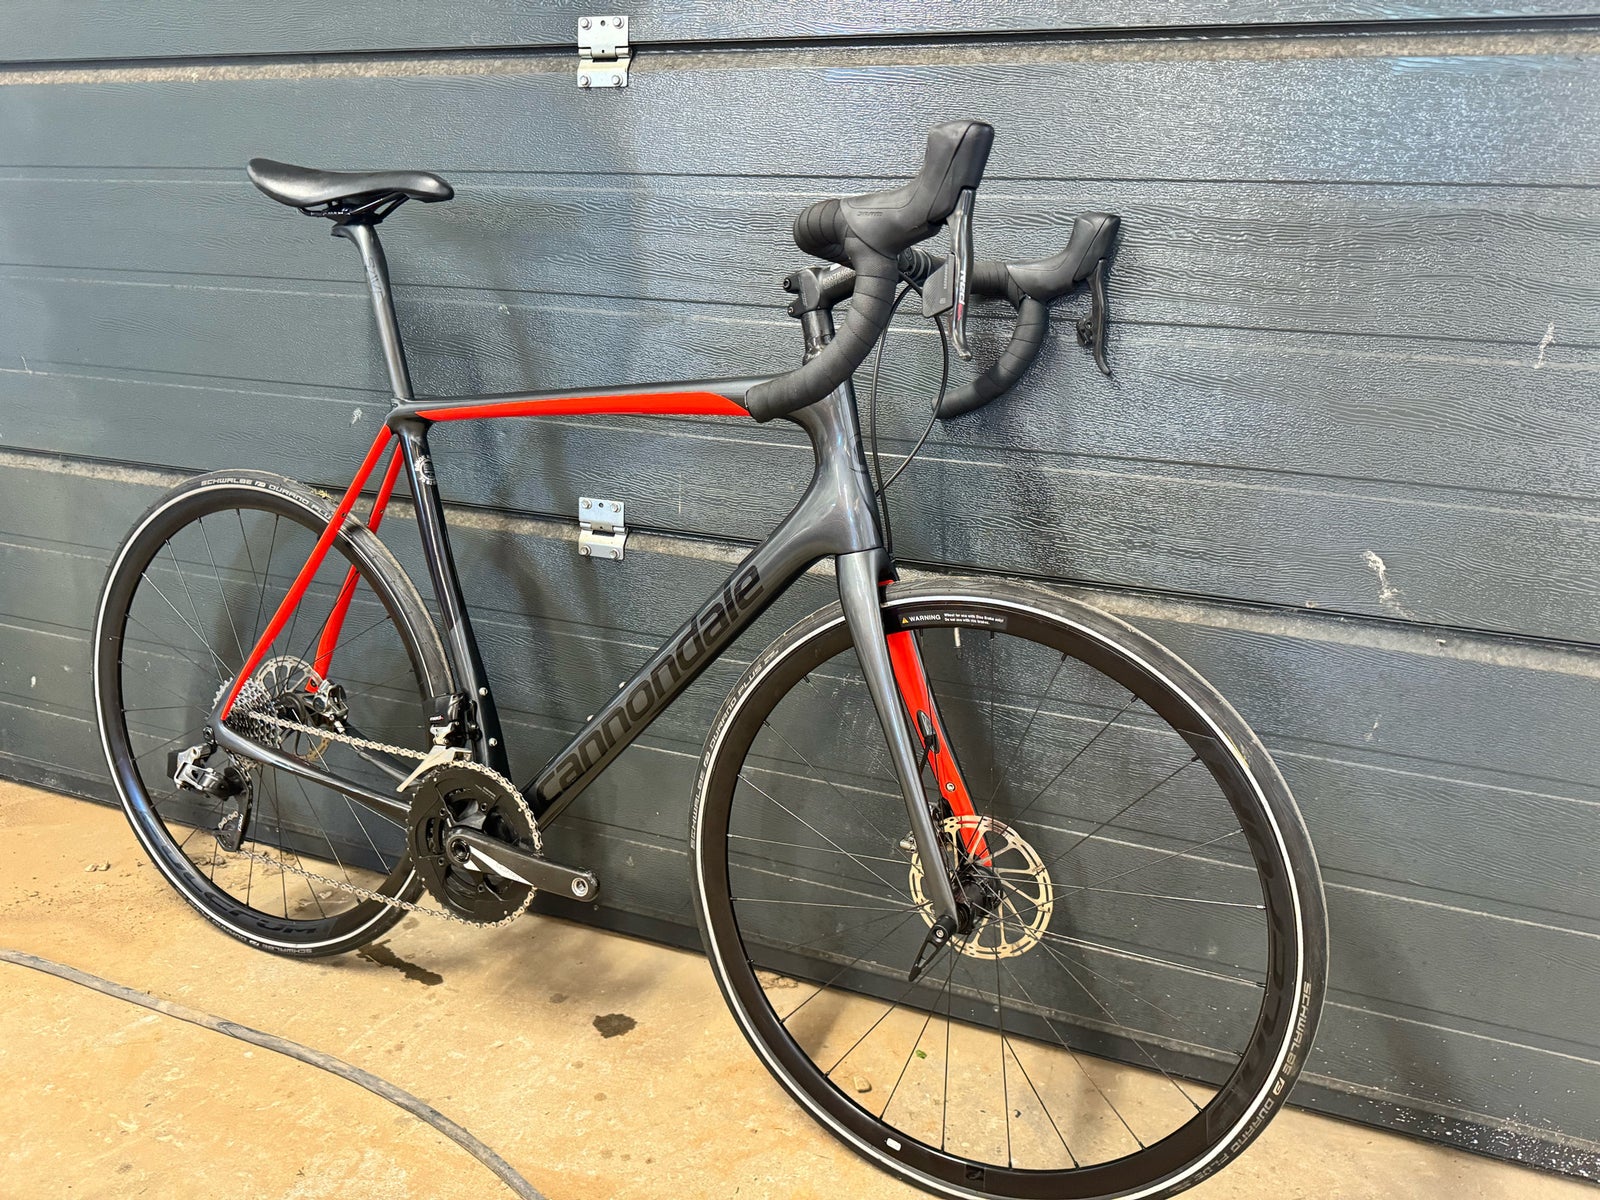 Herreracer, Cannondale Synaps, 58 cm stel